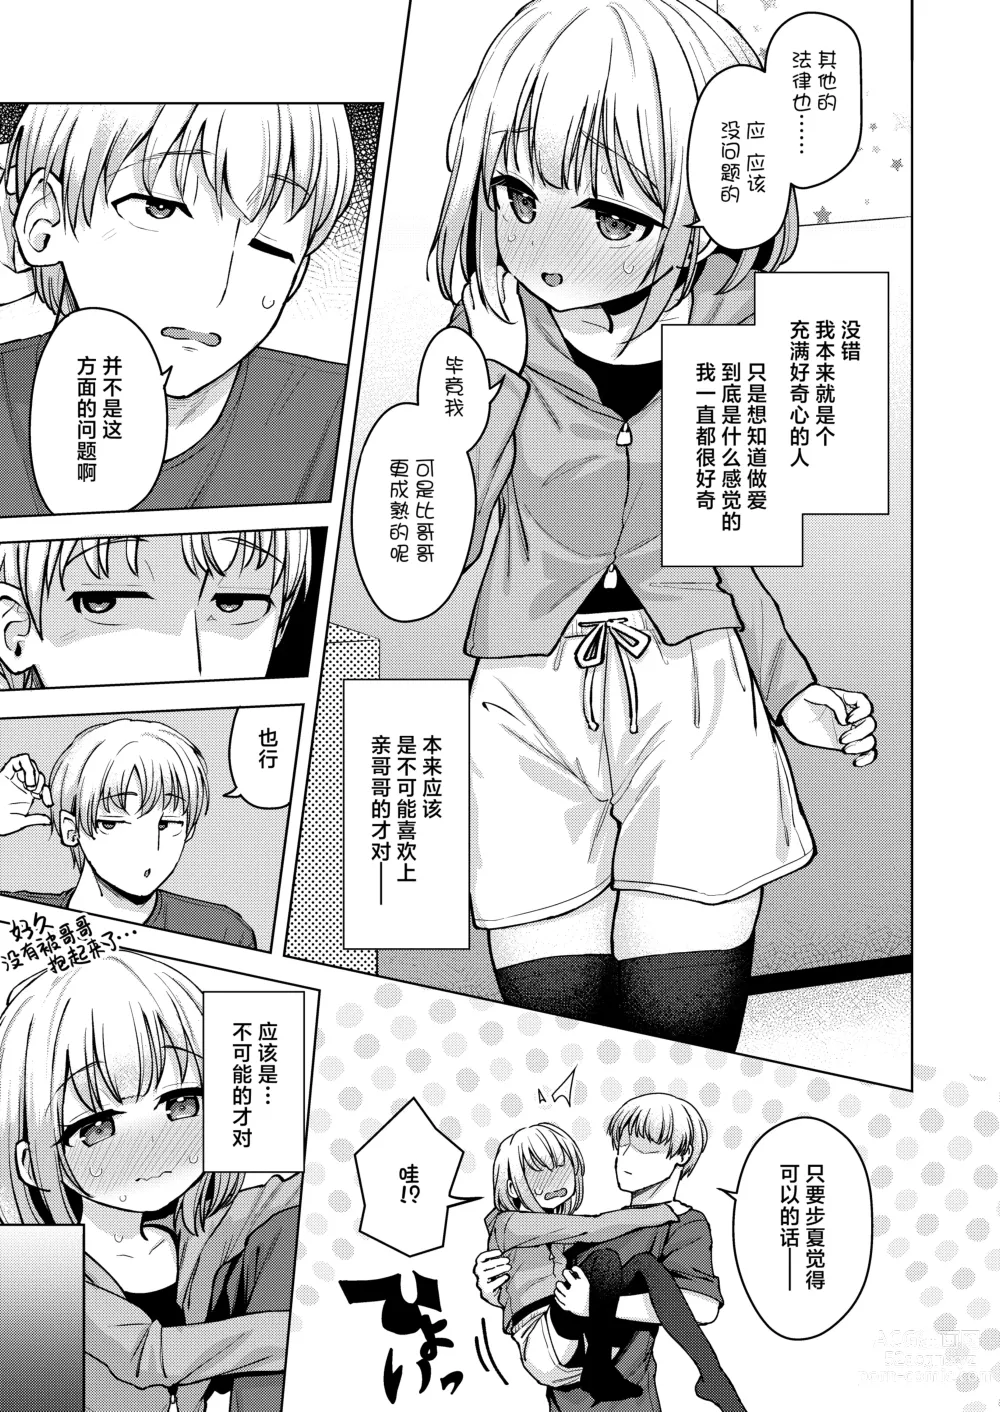 Page 9 of doujinshi 邪心妹妹真是太棒了